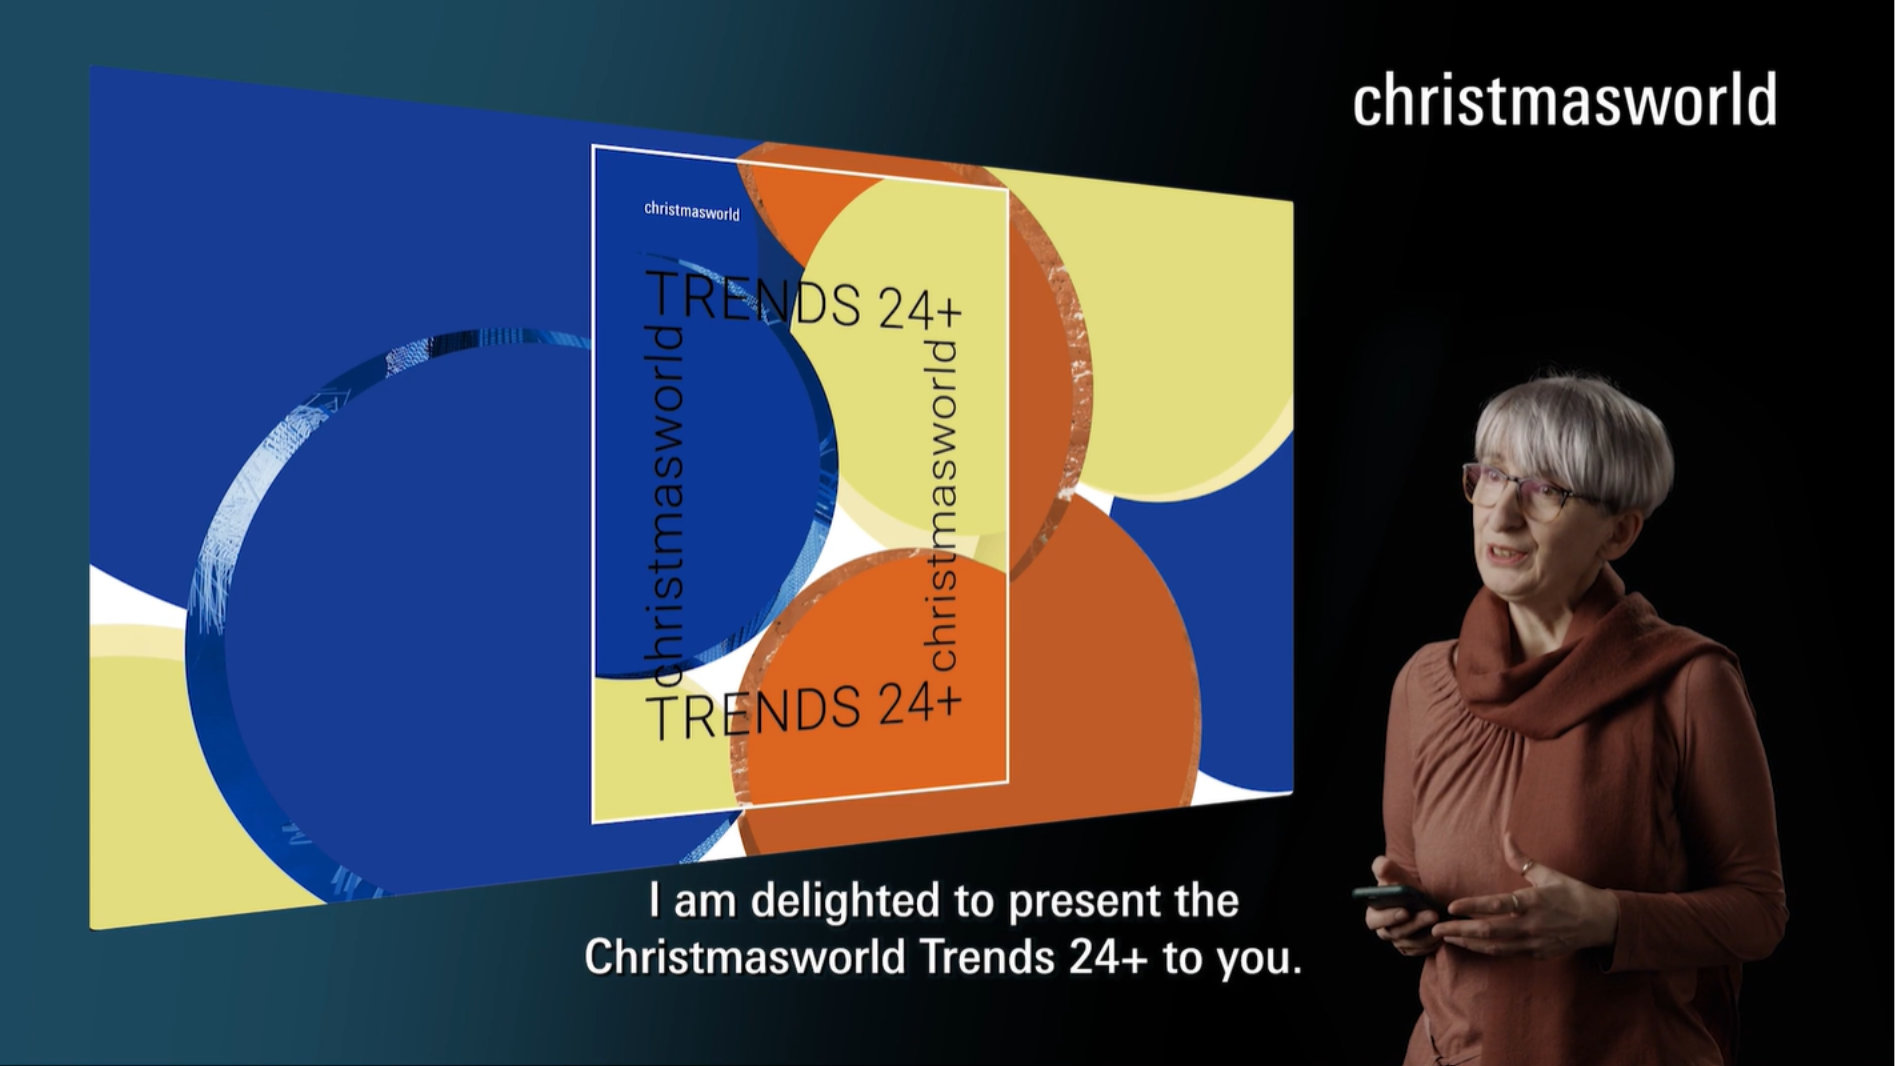 Annetta Palmisano gives a lecture on Christmasworld Trends 24+